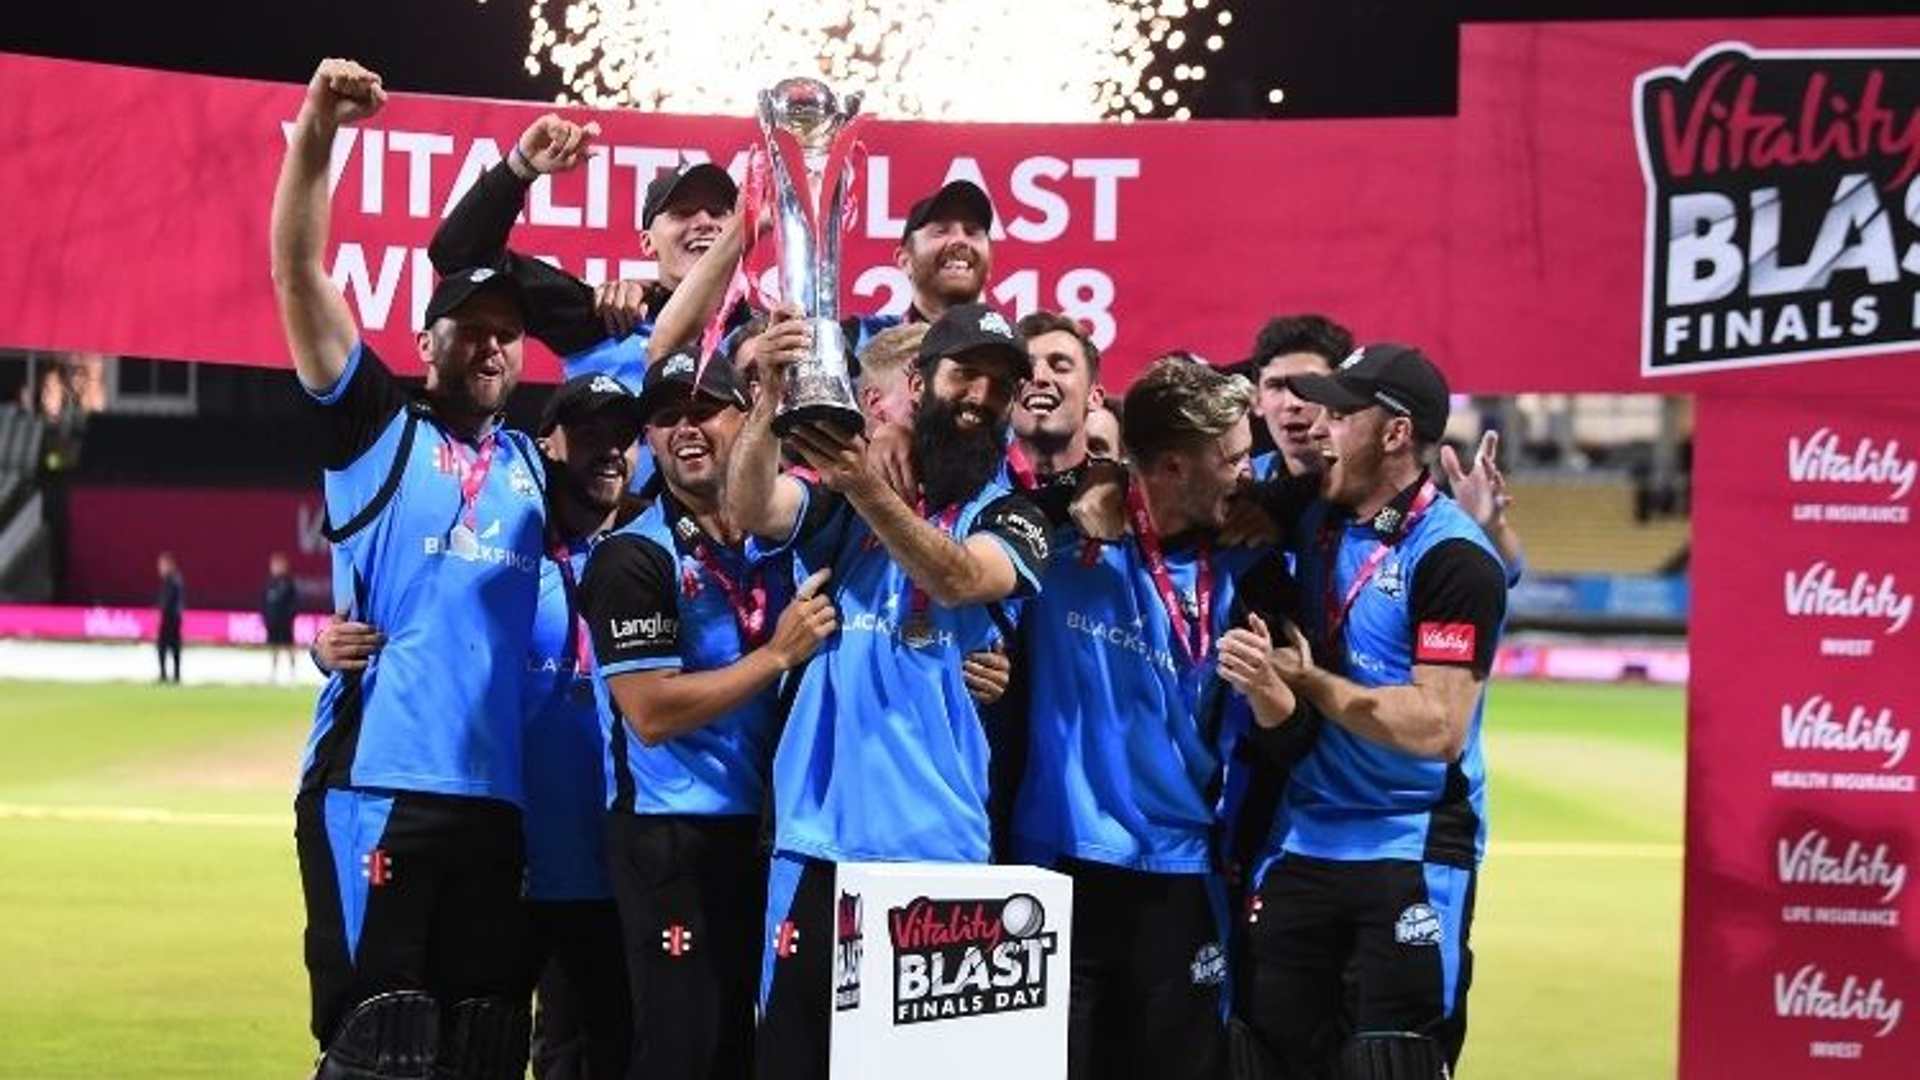 T20 Blast 2022 LIVE Streaming, When and Where to Watch, Points Table, Fixtures